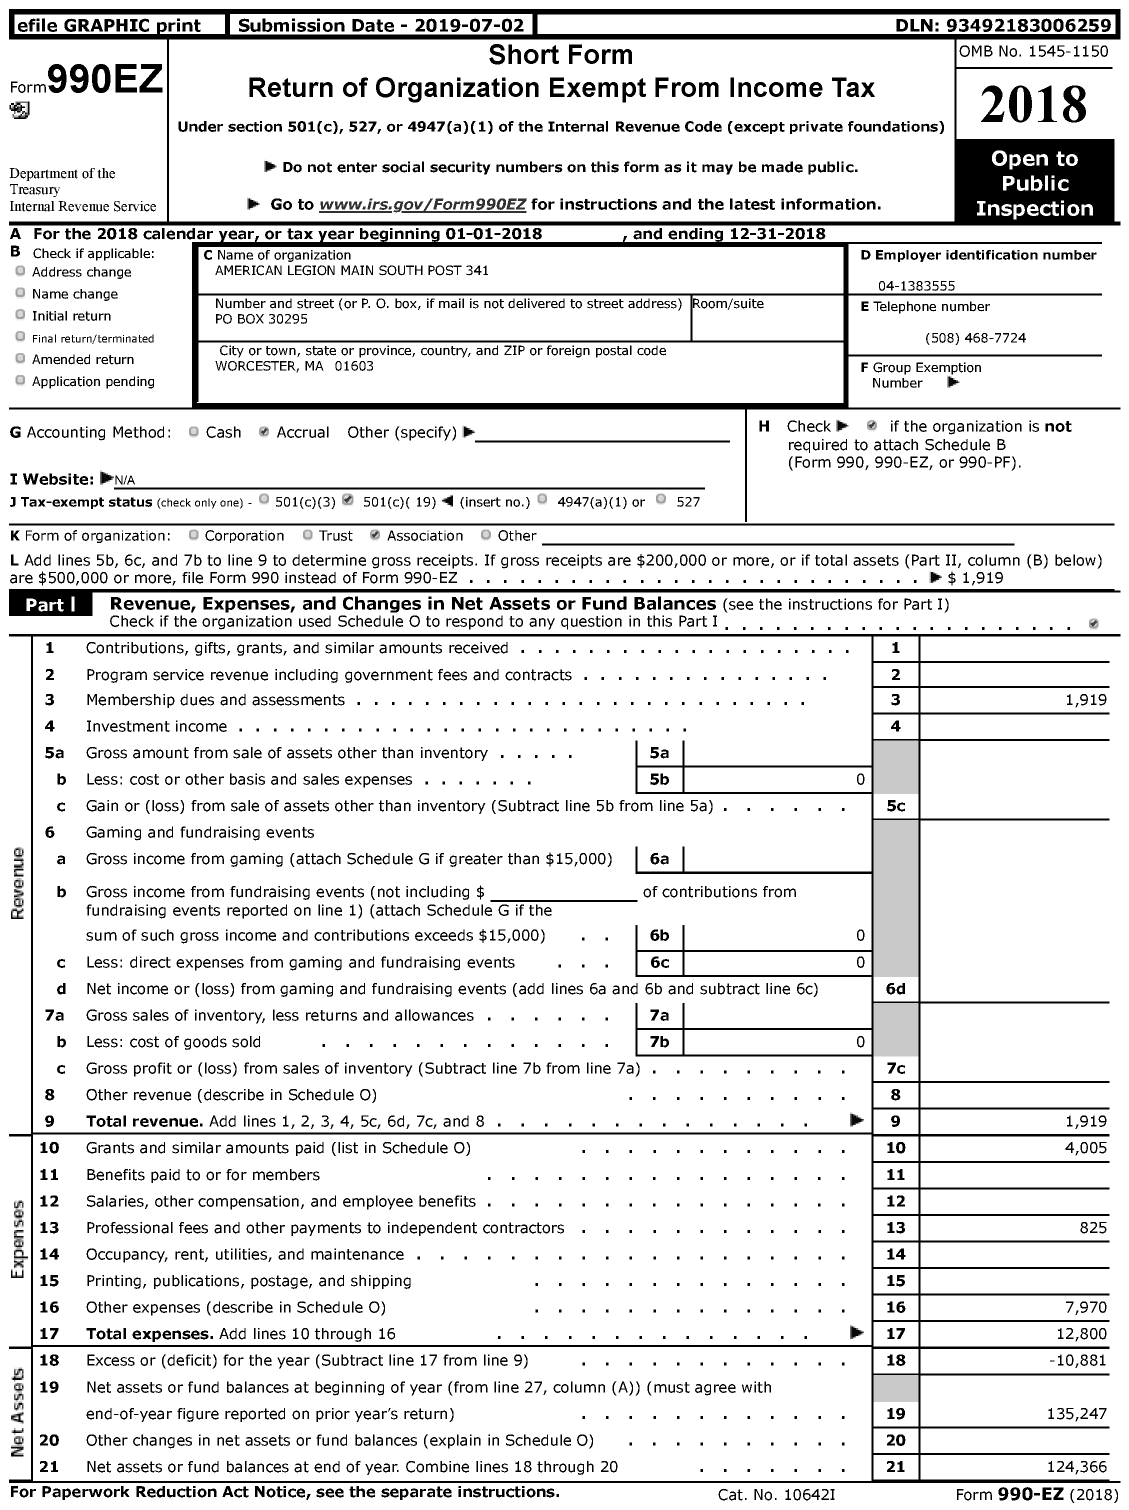 Image of first page of 2018 Form 990EZ for American Legion - 0341 Main South